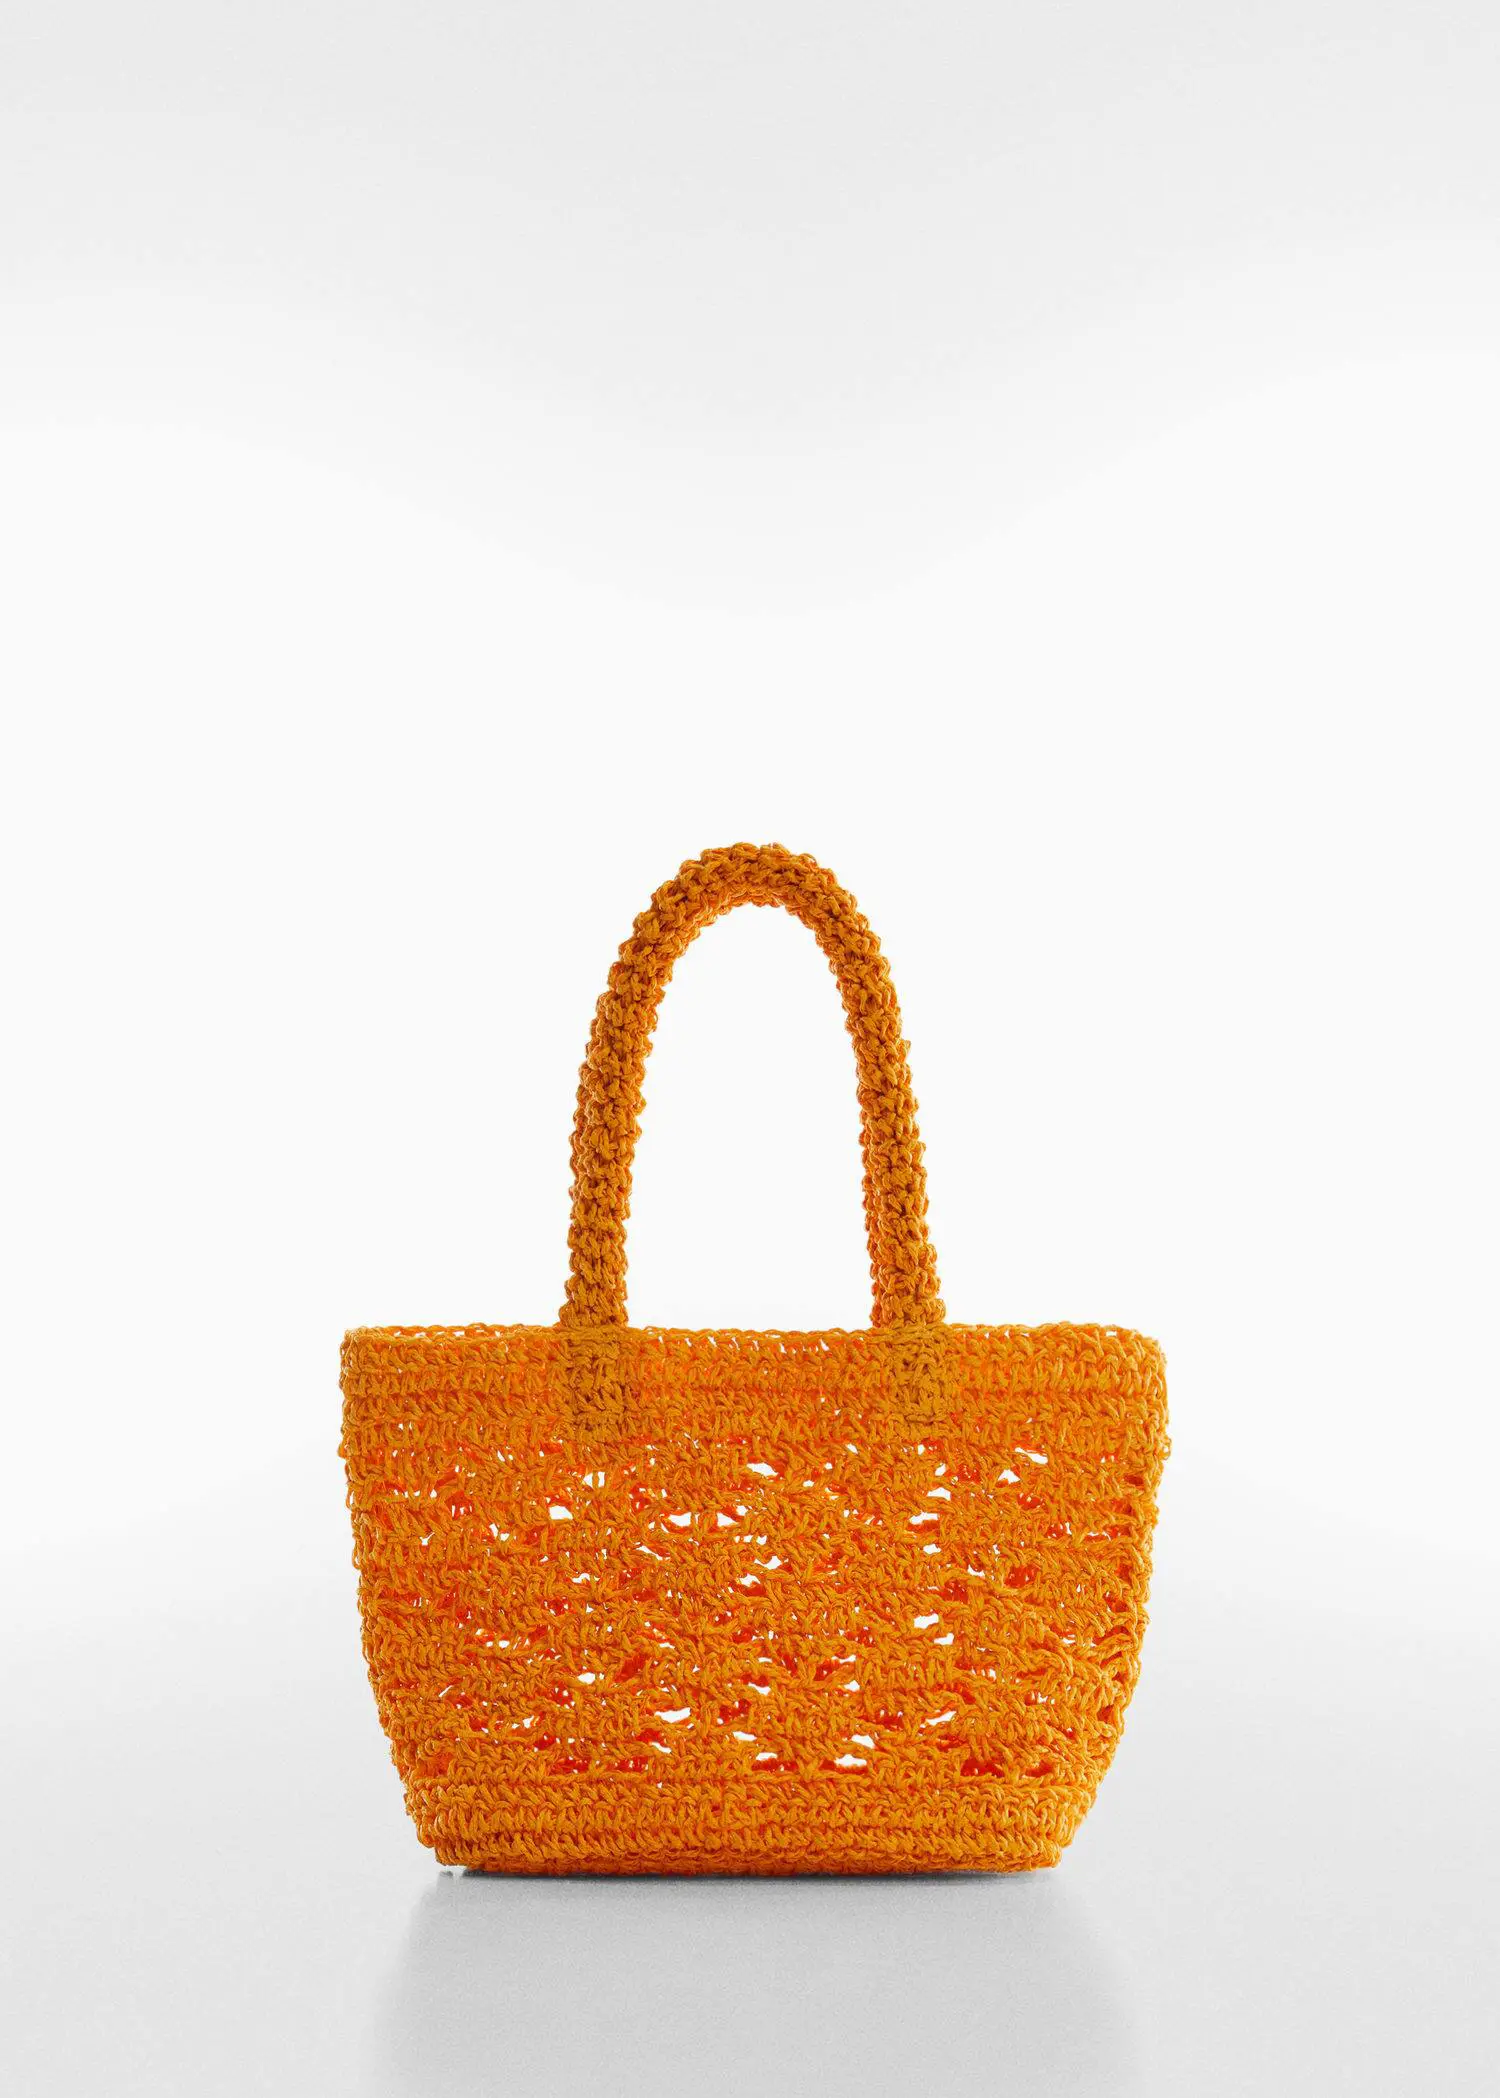 Mango Double-handle raffia bag. an orange crocheted bag with handles on a white background 